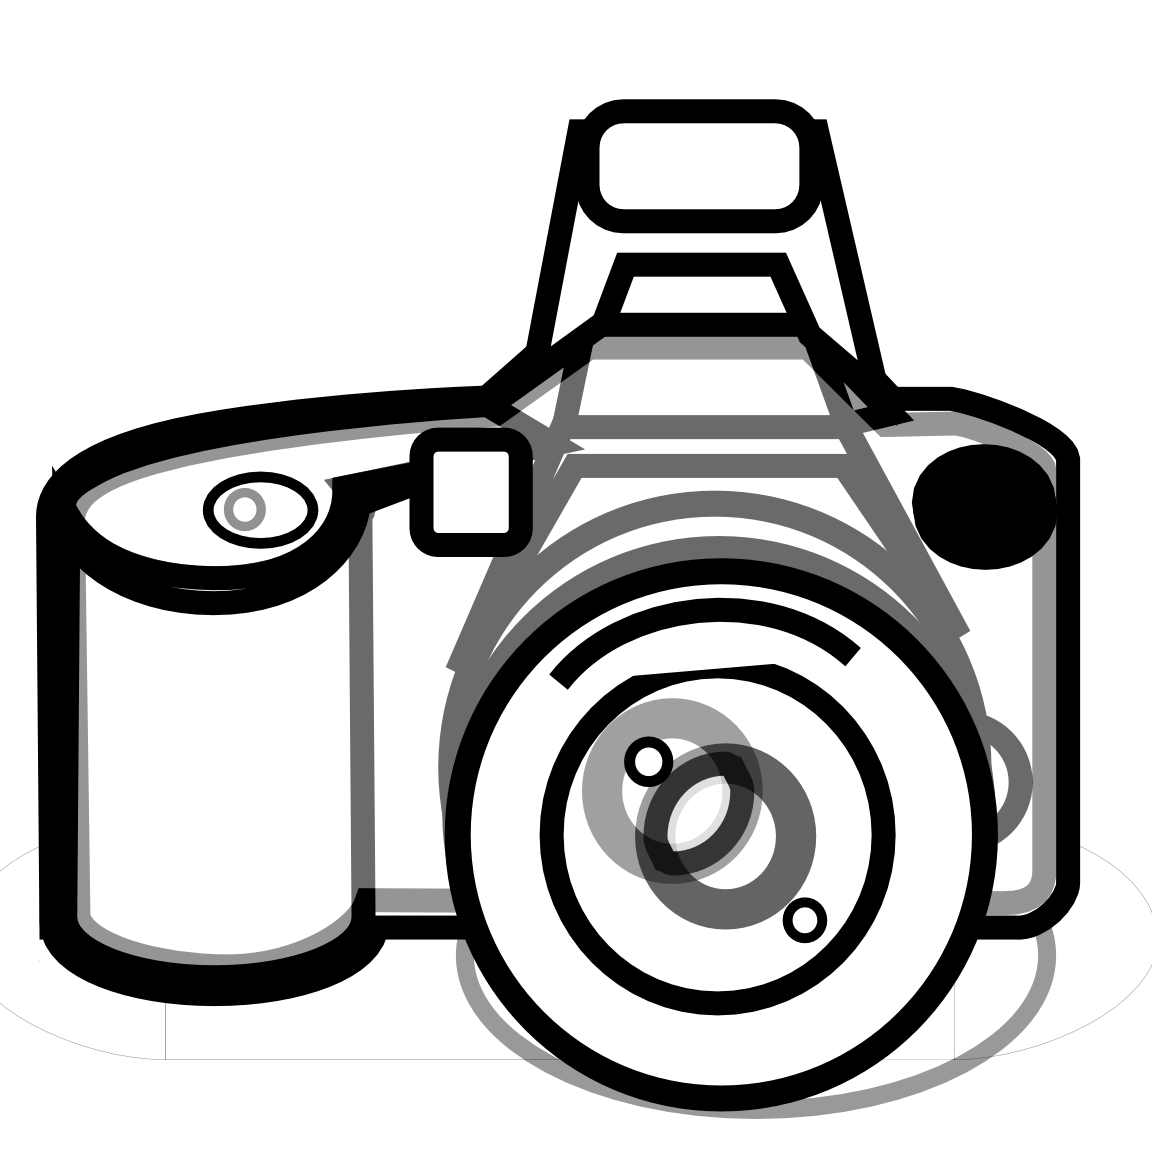 Logo clipart camera. Black and white png